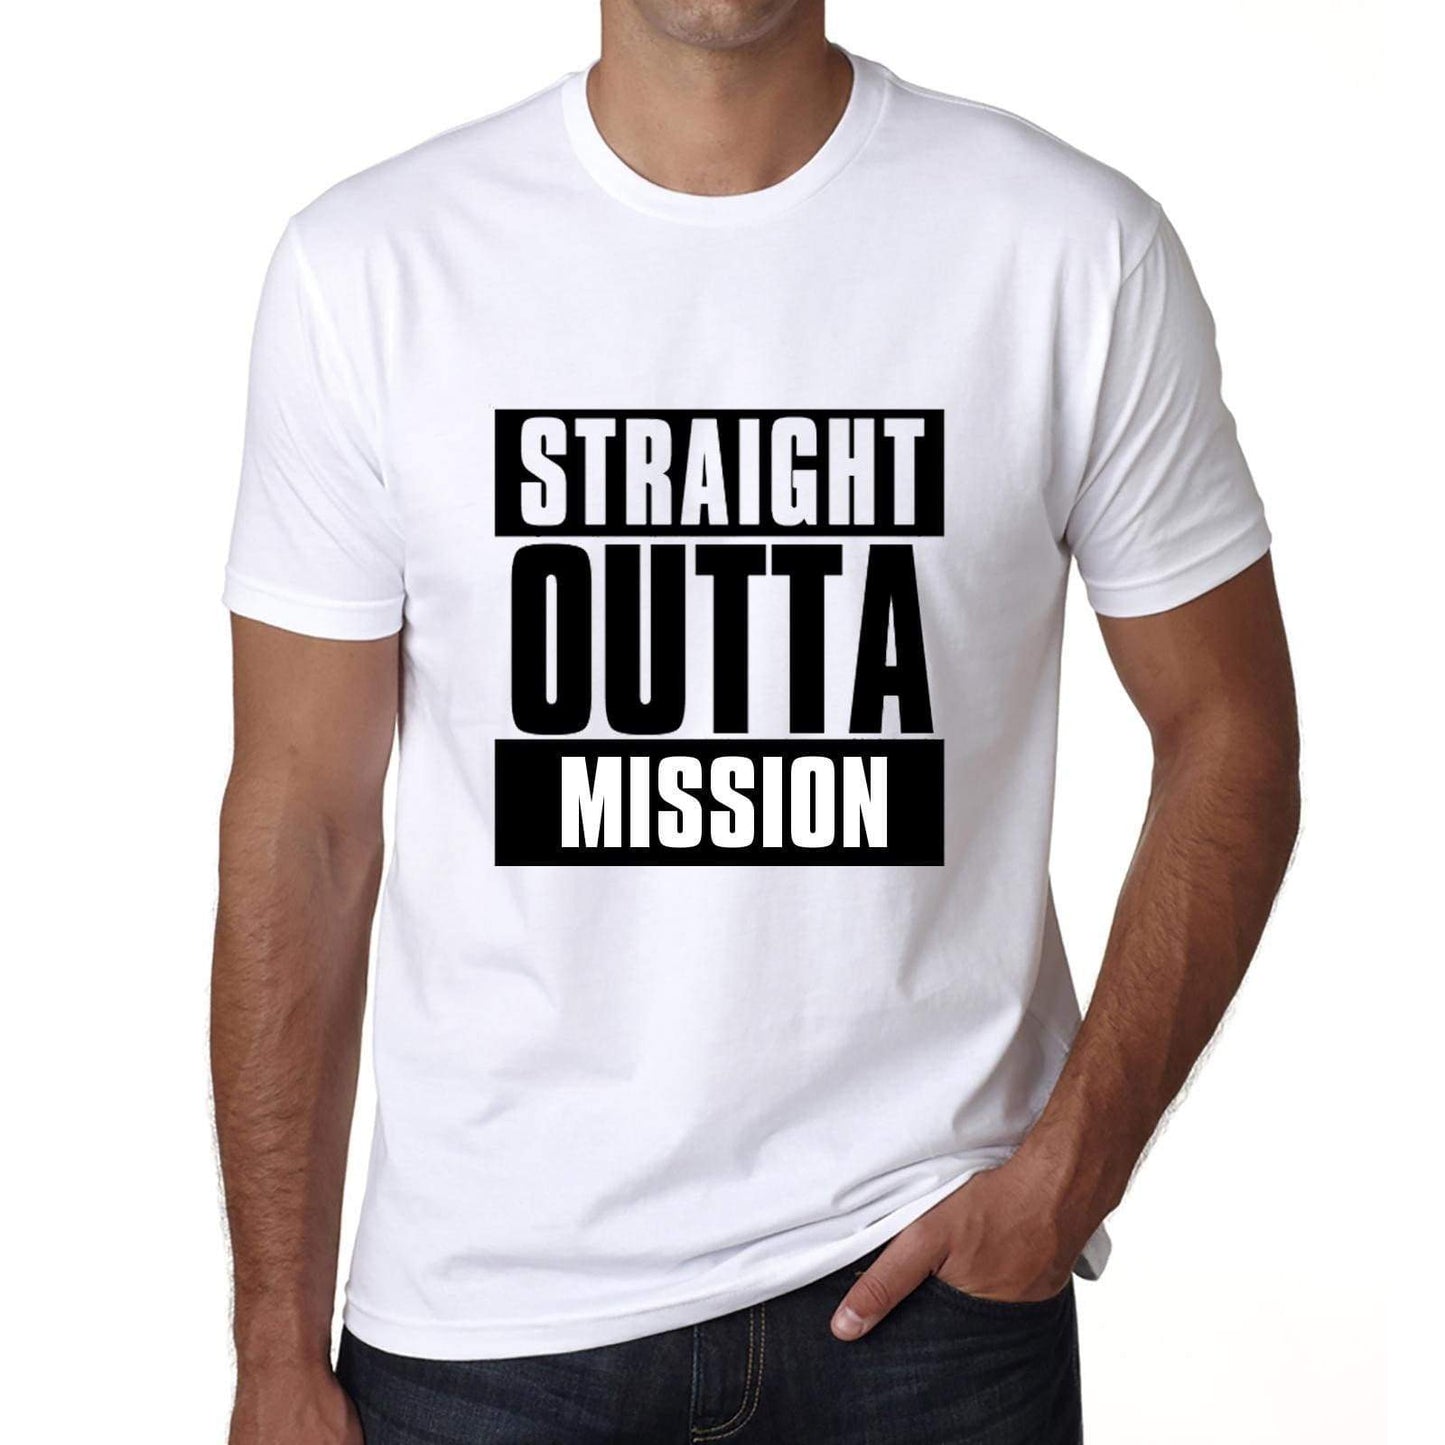 Straight Outta Mission Mens Short Sleeve Round Neck T-Shirt 00027 - White / S - Casual